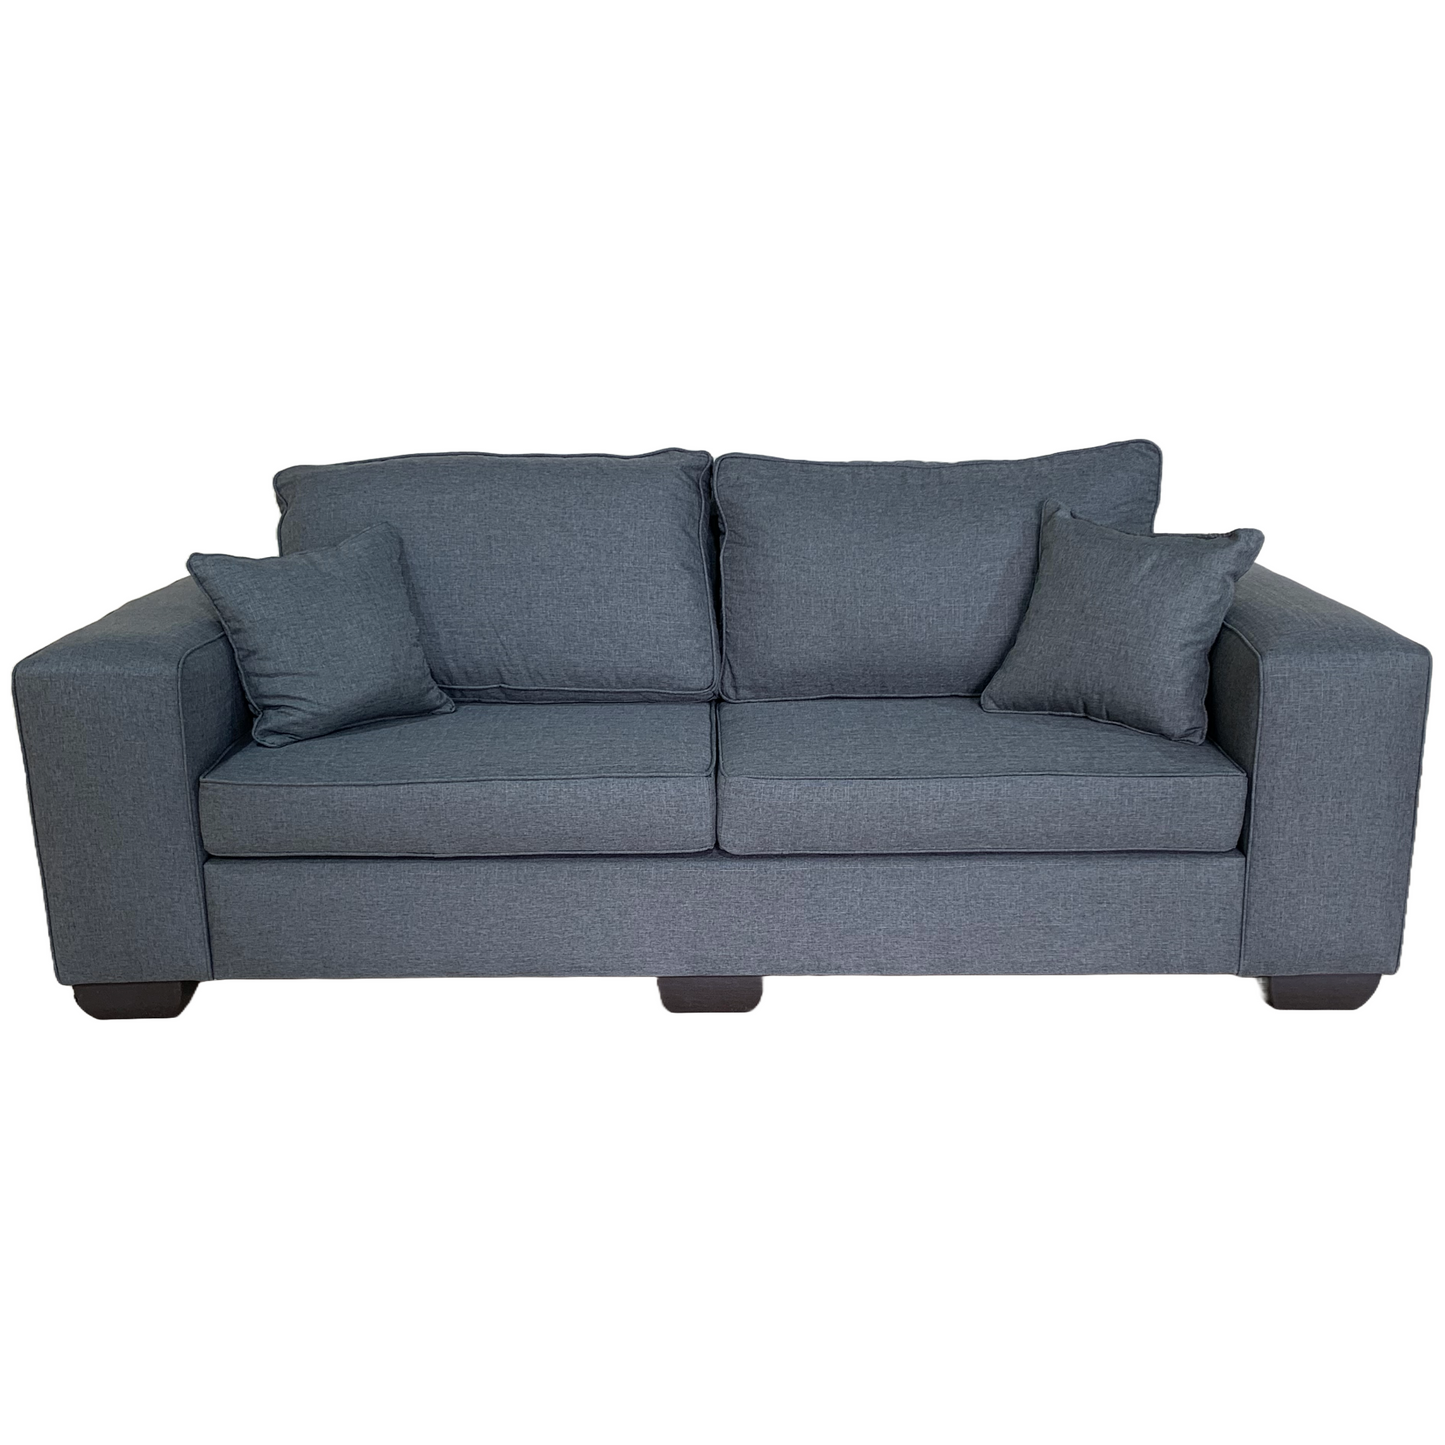 Elena 2 Seater Couch